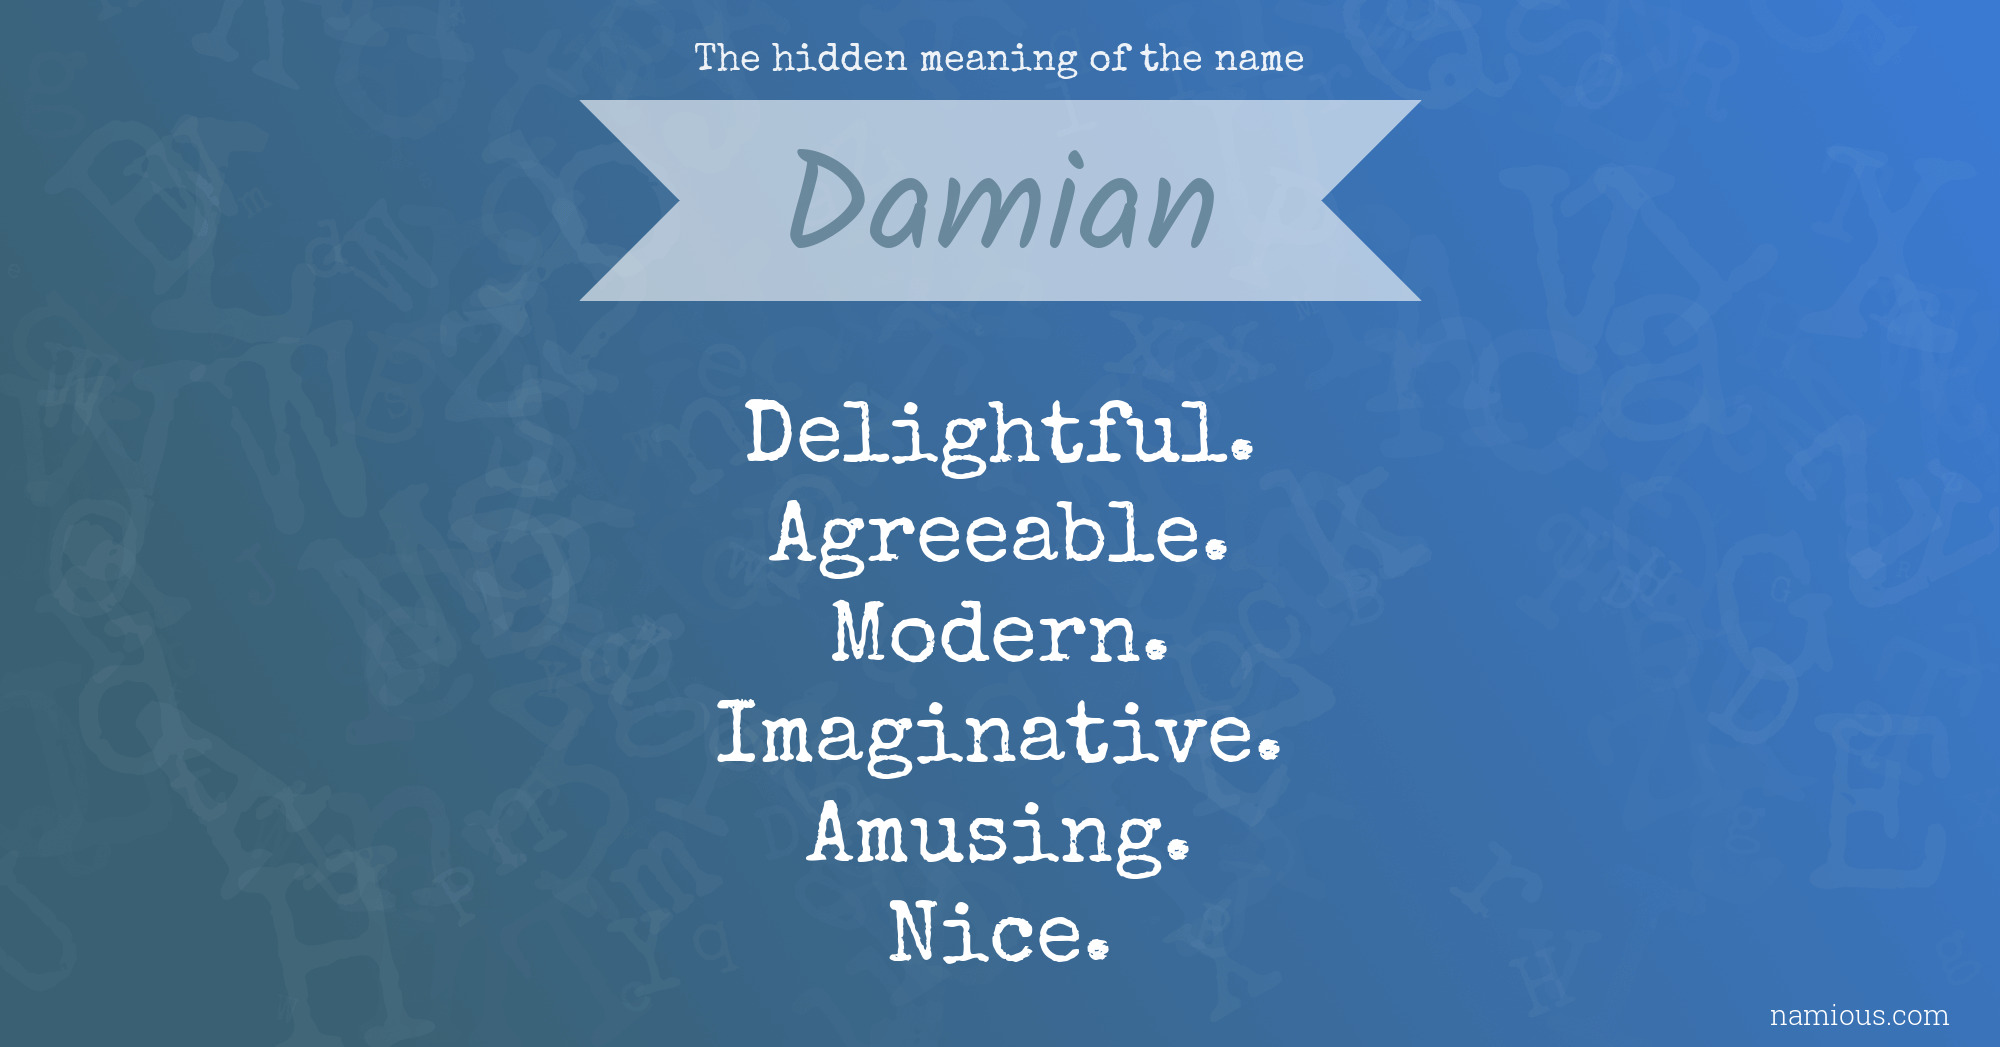 The hidden meaning of the name Damian